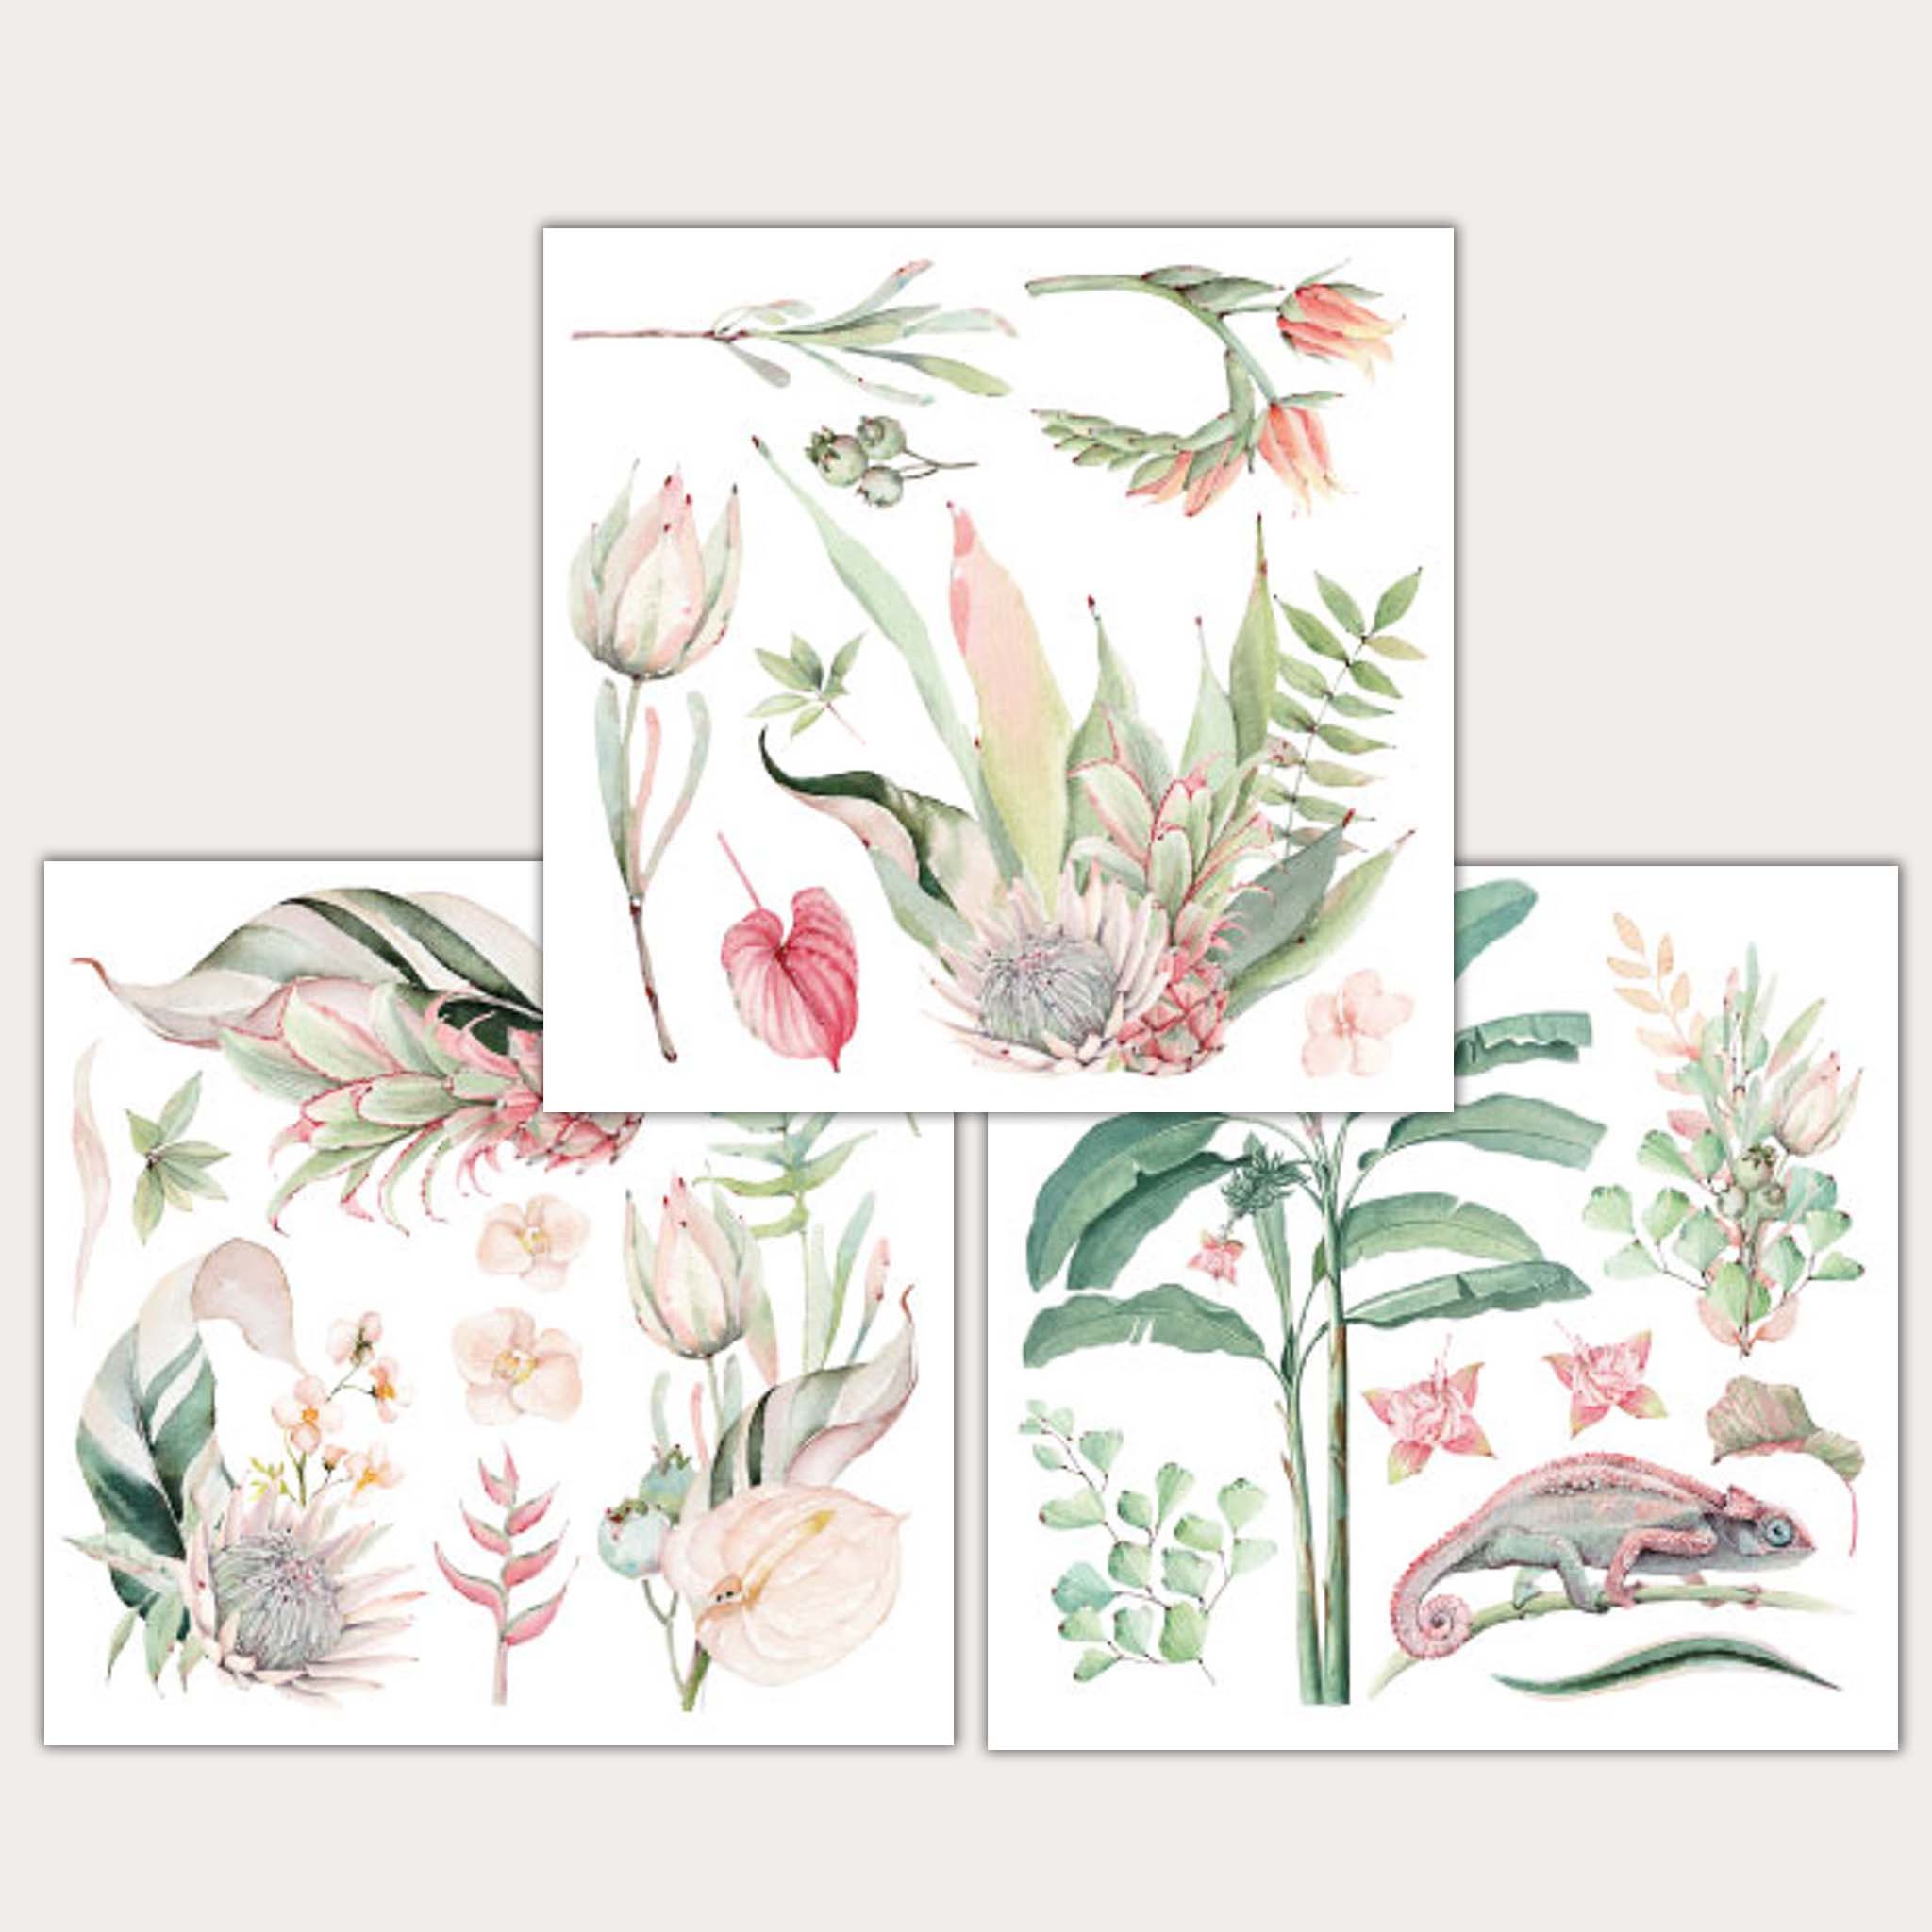 On a light beige background are three 12 x 12 inch sheets of small rub-on transfers featuring lush pink and green tropical foliage and a chameleon. 